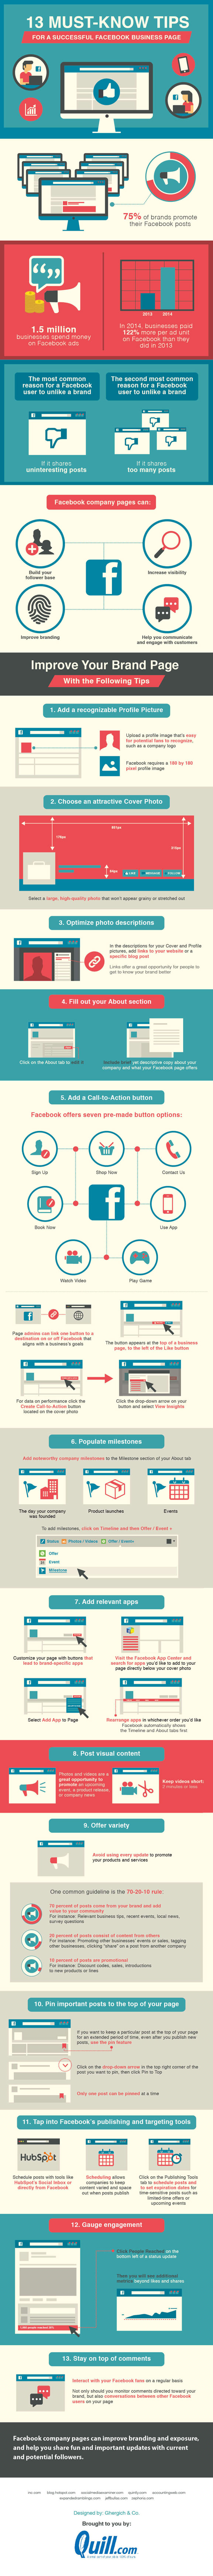 13 Must-Know Tips for a Successful Facebook Business Page Infographic